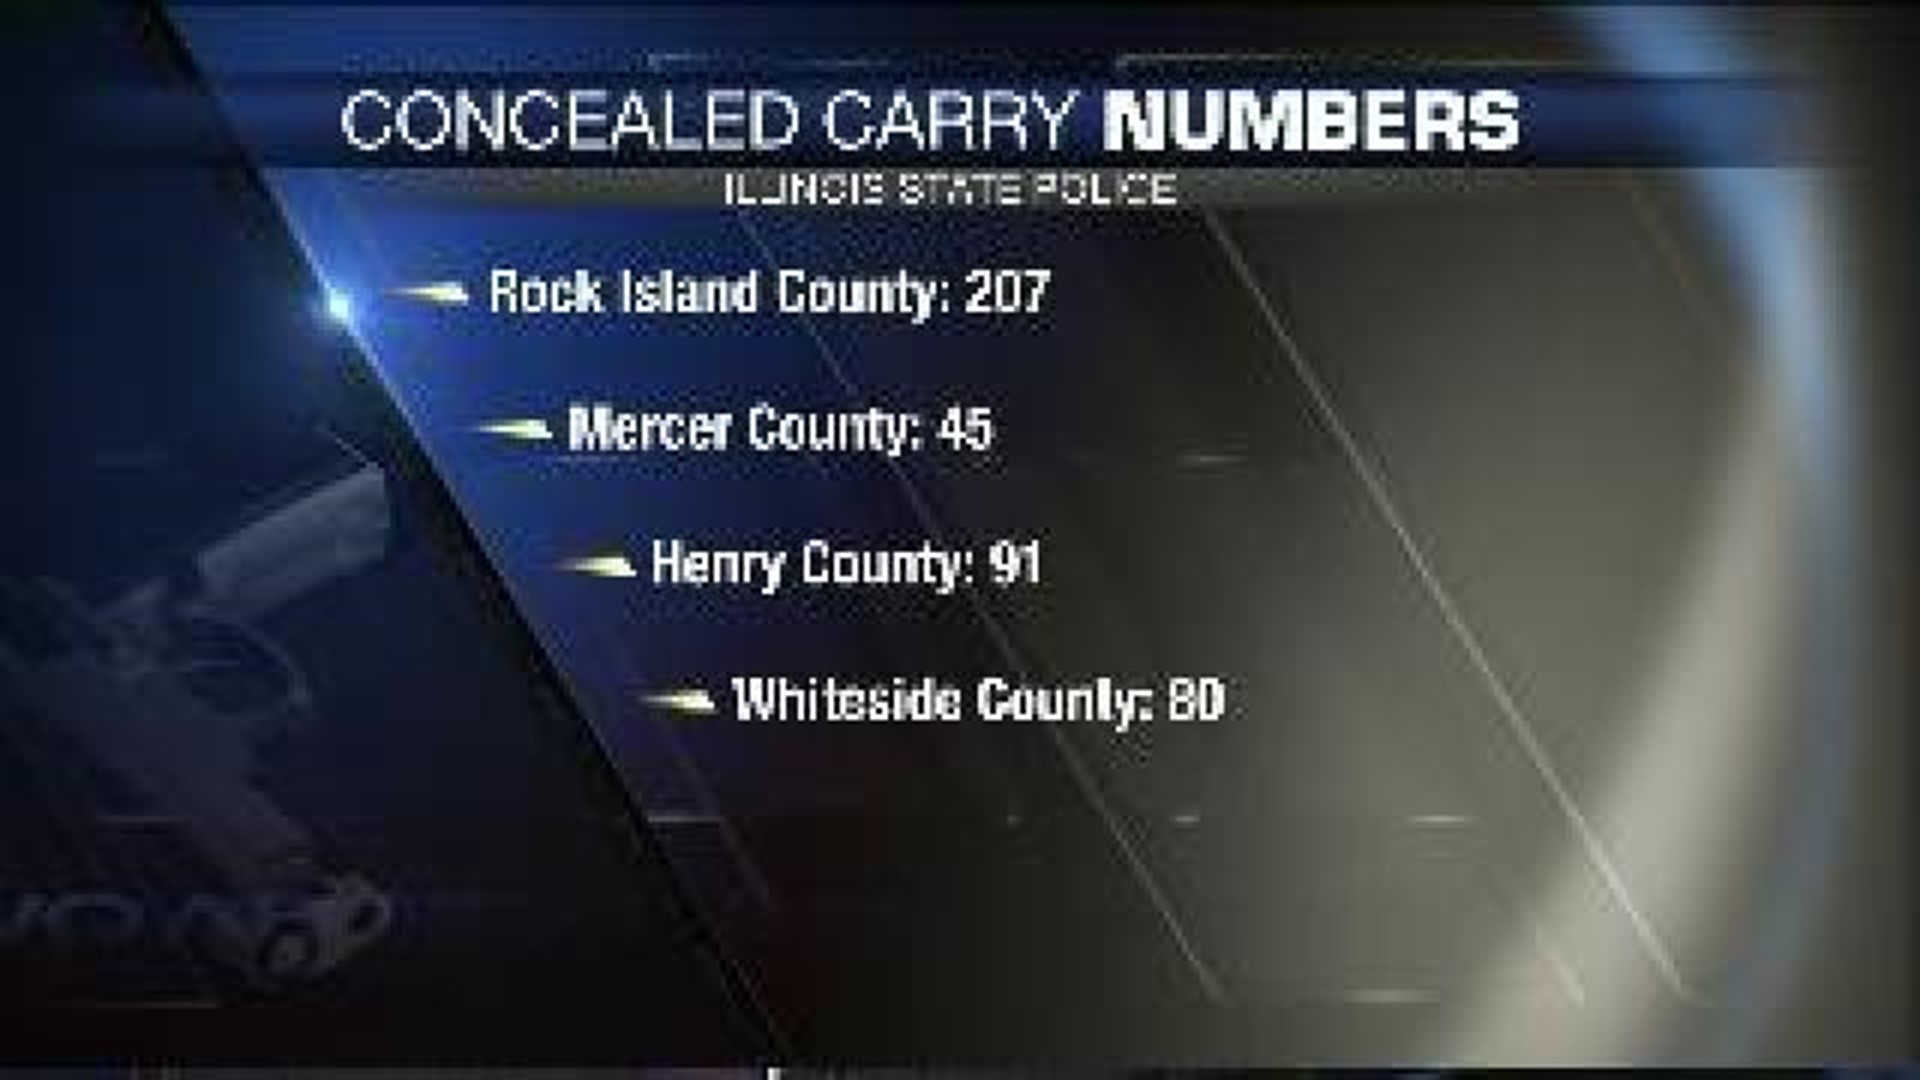 Concealed carry numbers